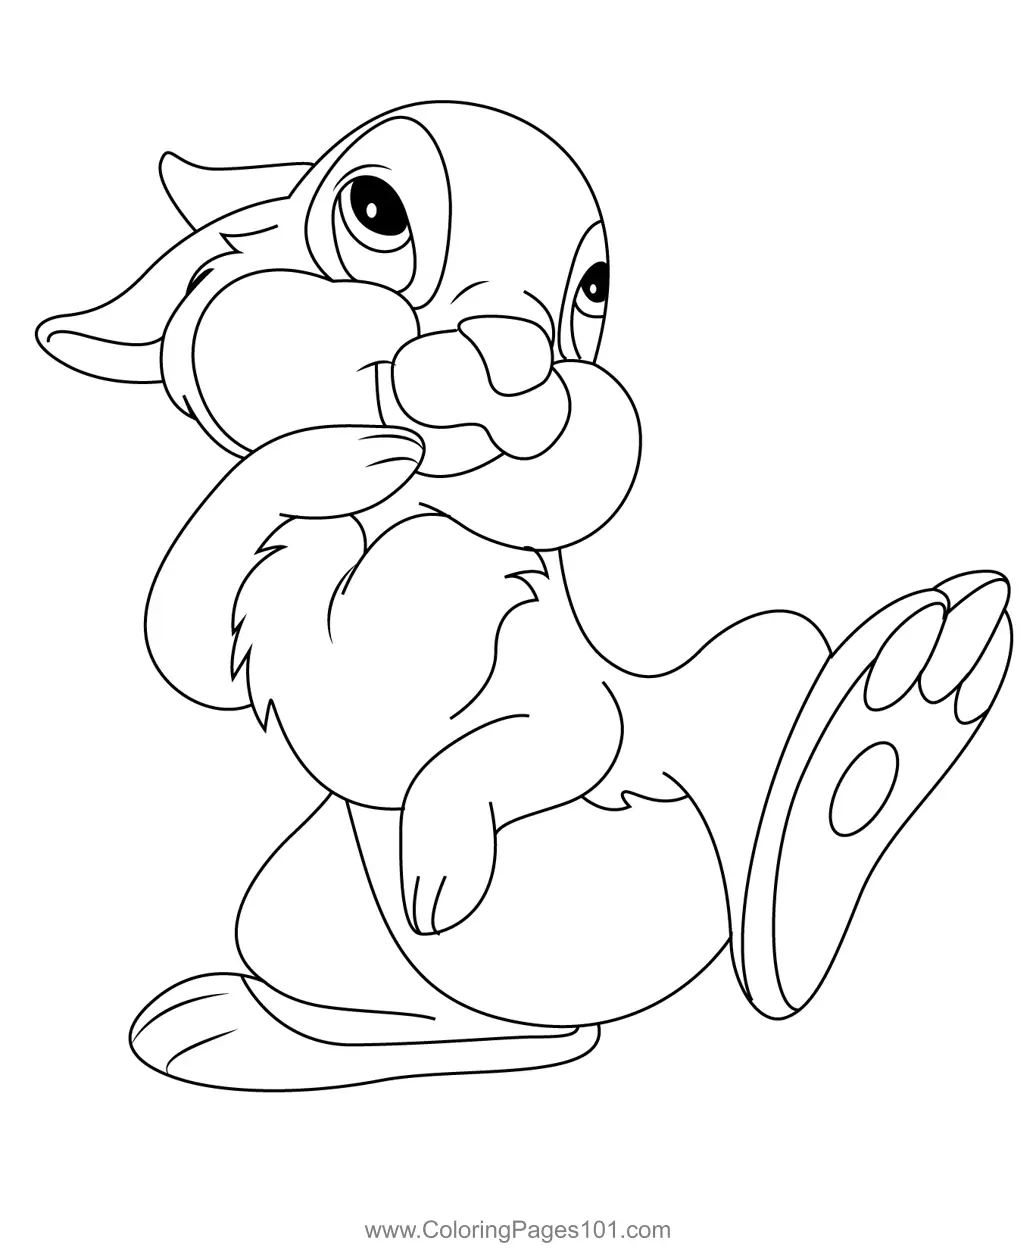 Bunnies Paw Up Coloring Page for Kids - Free Crocodile Printable ...